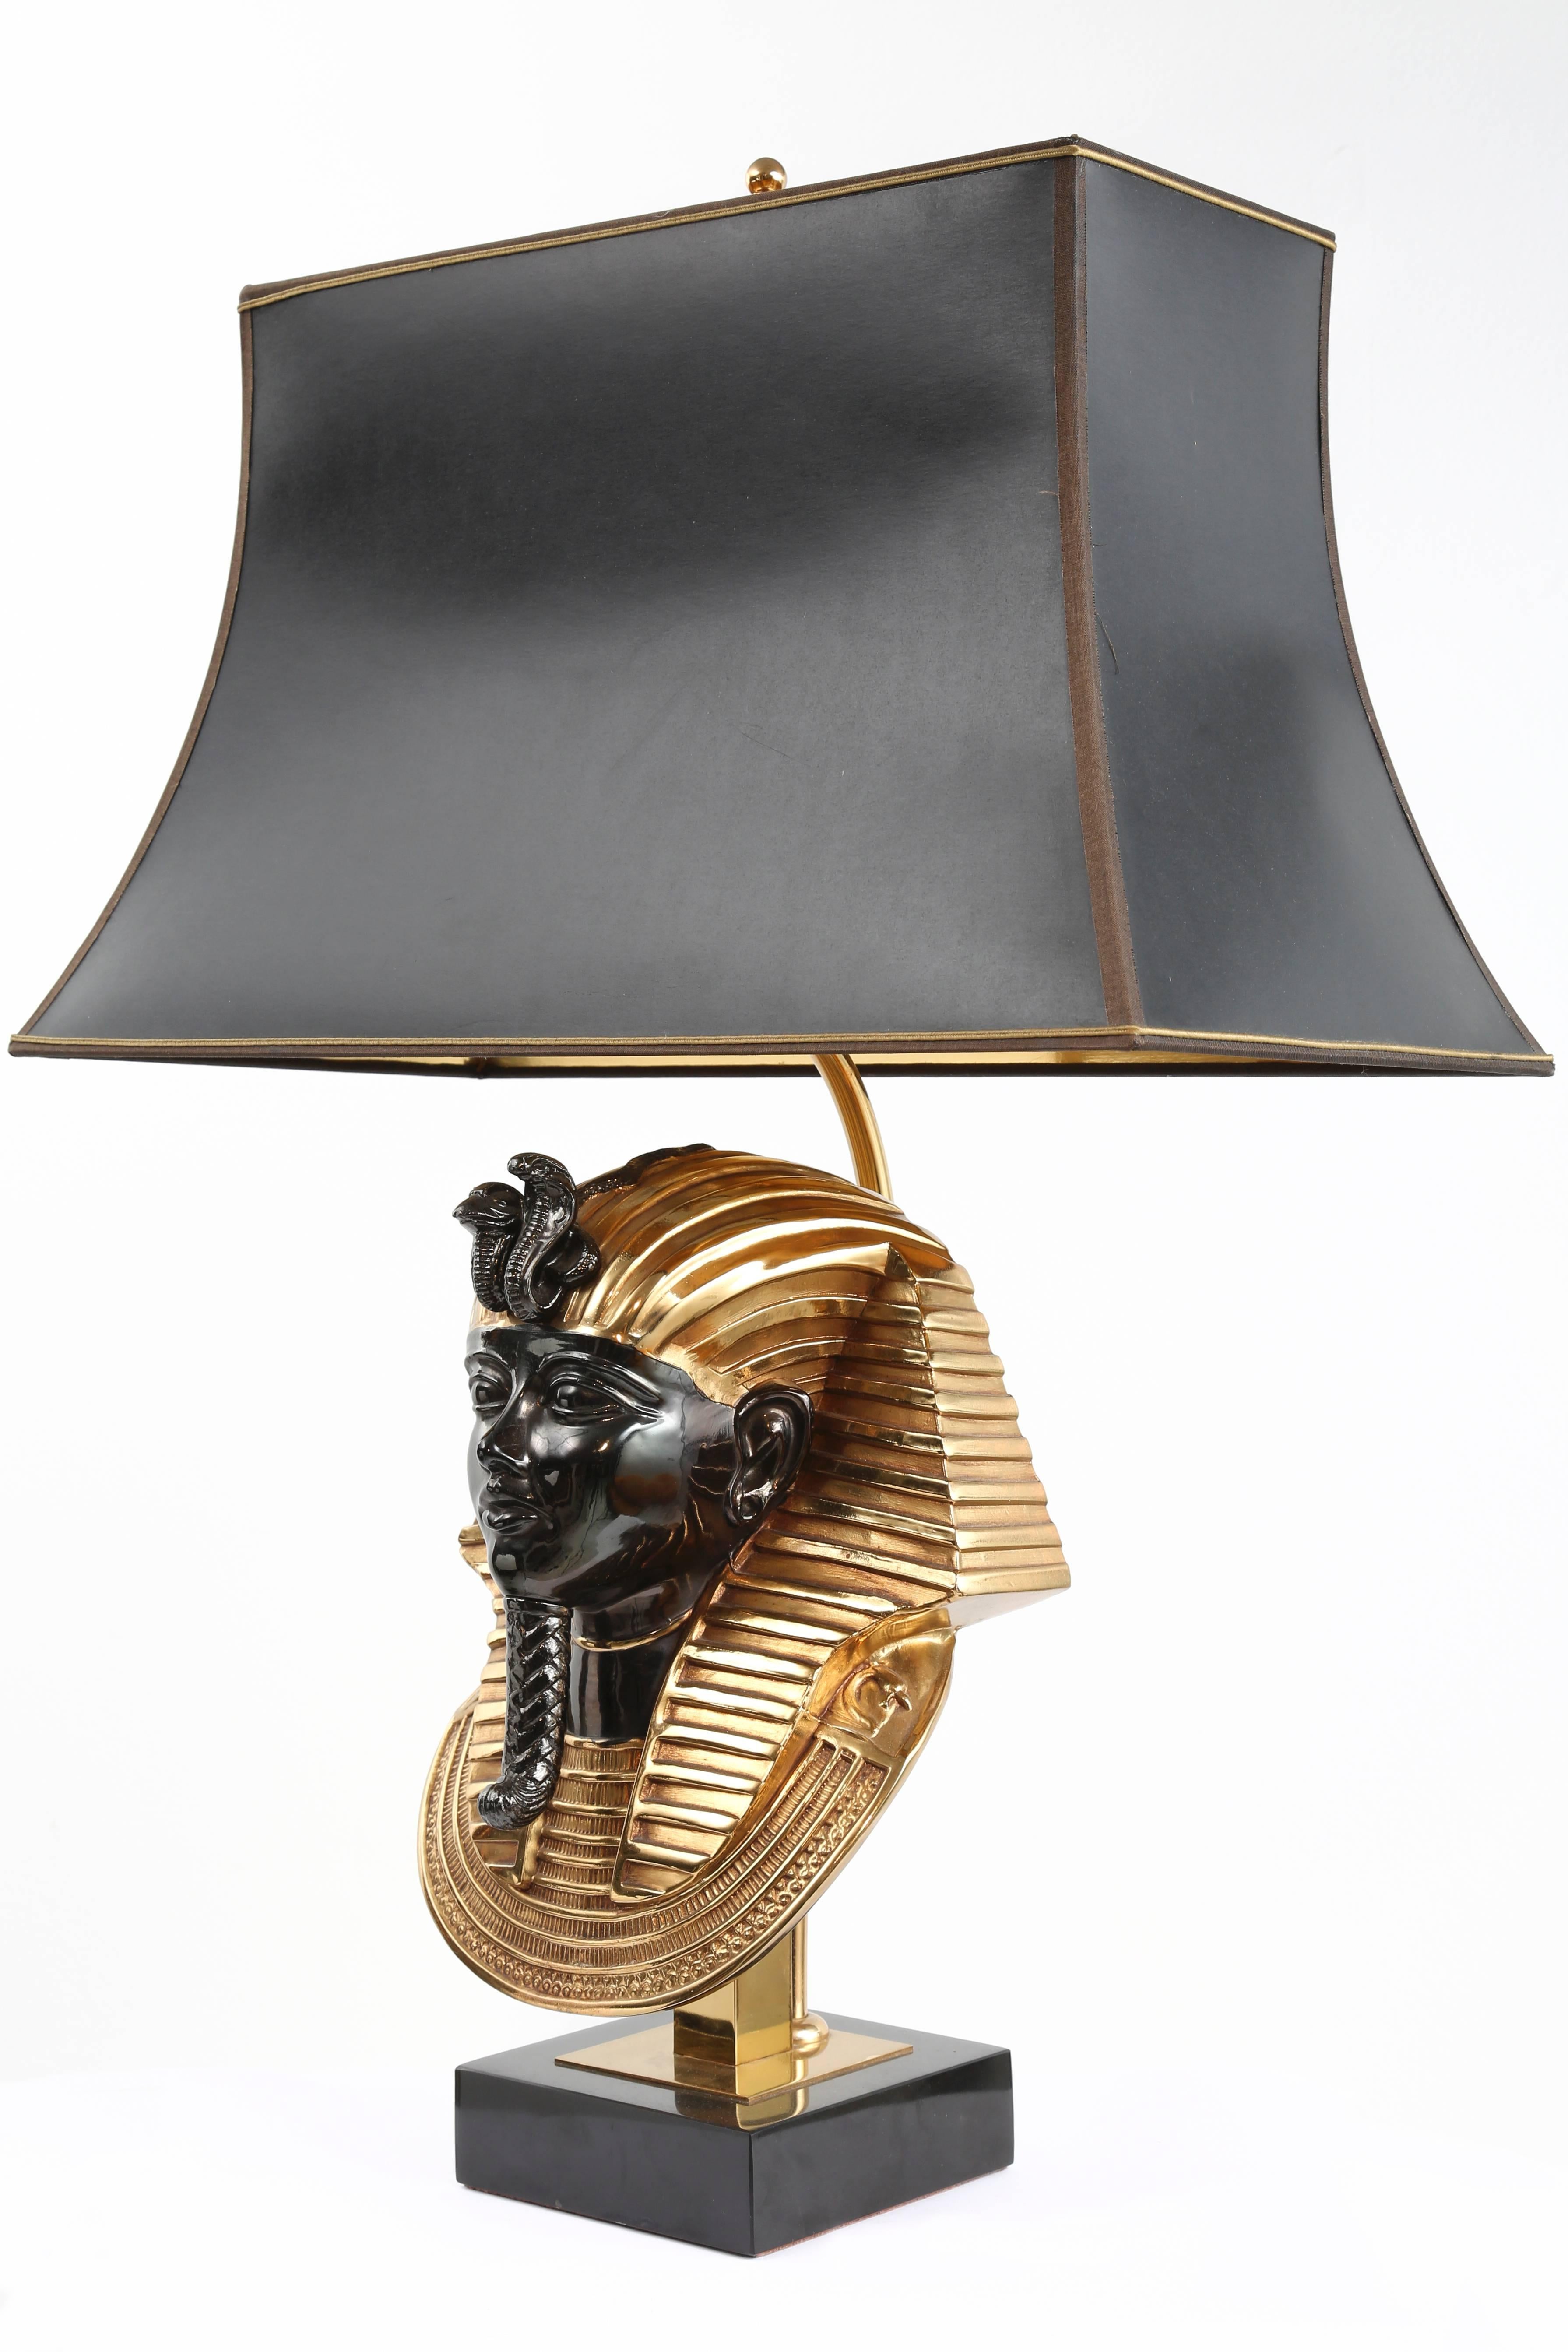 A pair of Egyptian revival Pharaoh head table lamps, model Faro, designed by Maison Jansen for Deknudt, Belgium, 1970s. The lamp is made from 24-karat gold-plated brass and bronze on black marble base, with original shades. Creates a soft light.